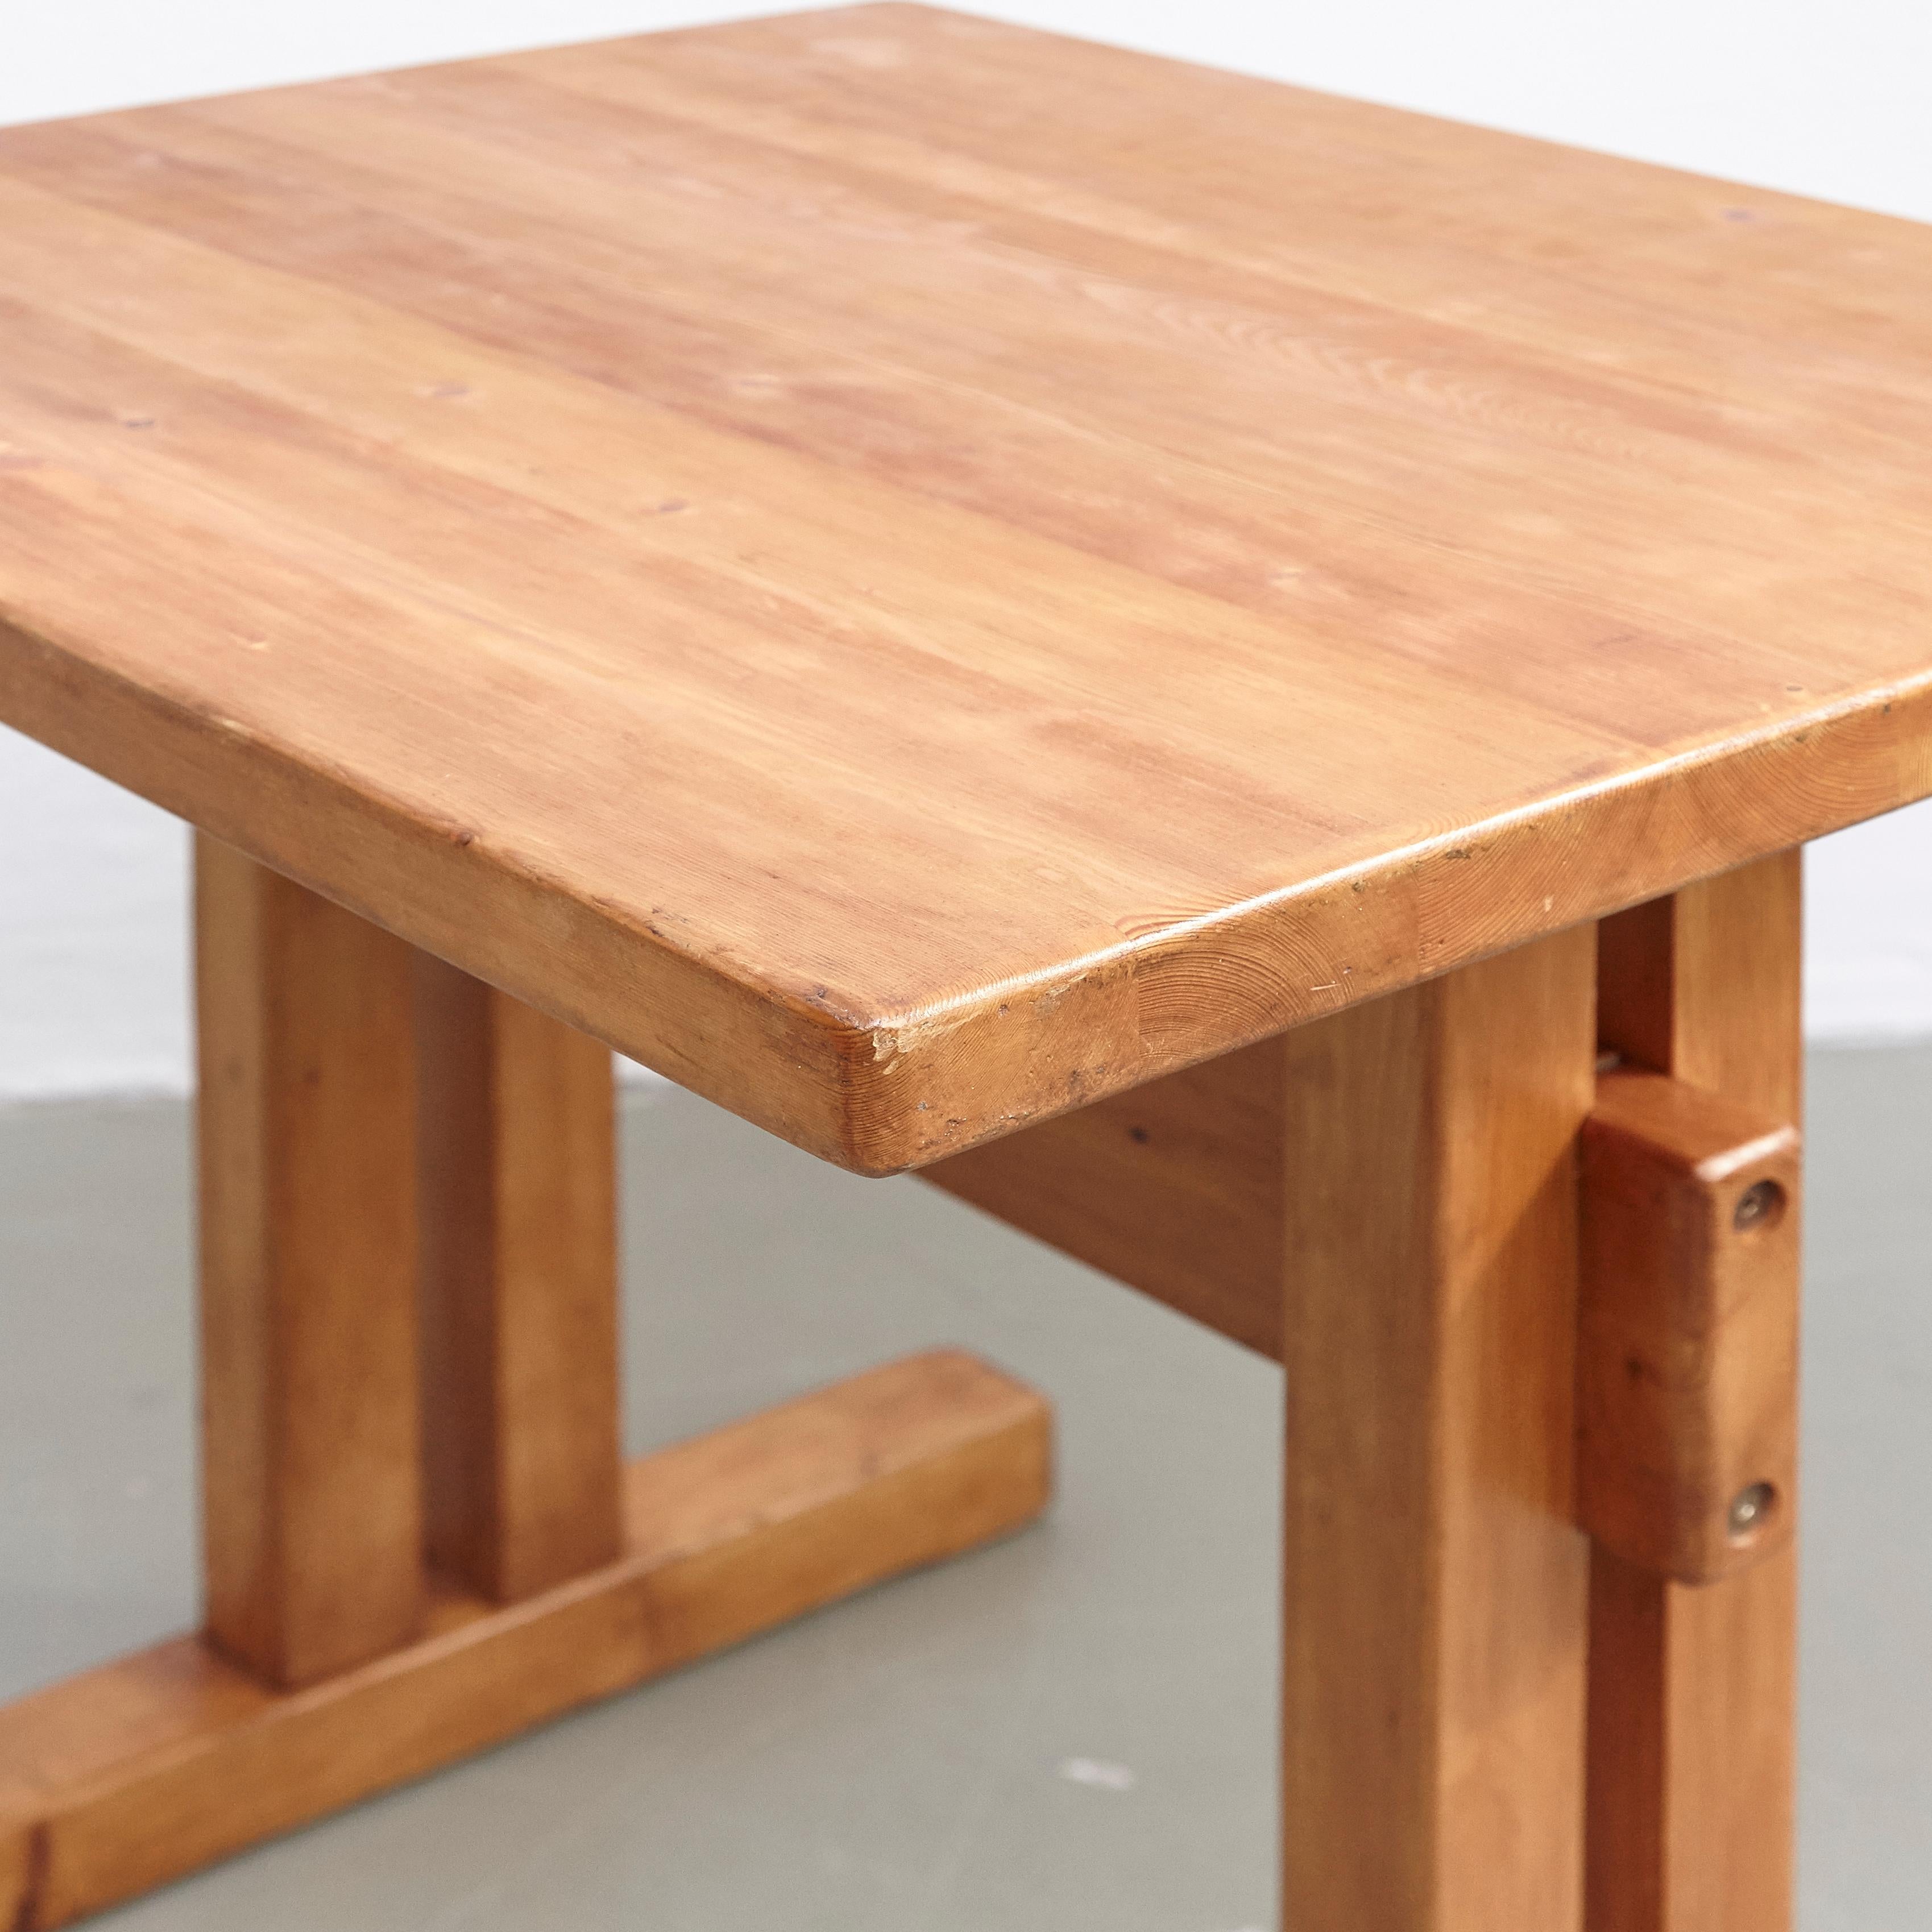 Mid-20th Century Charlotte Perriand Small Wood Table for Les Arcs, circa 1960